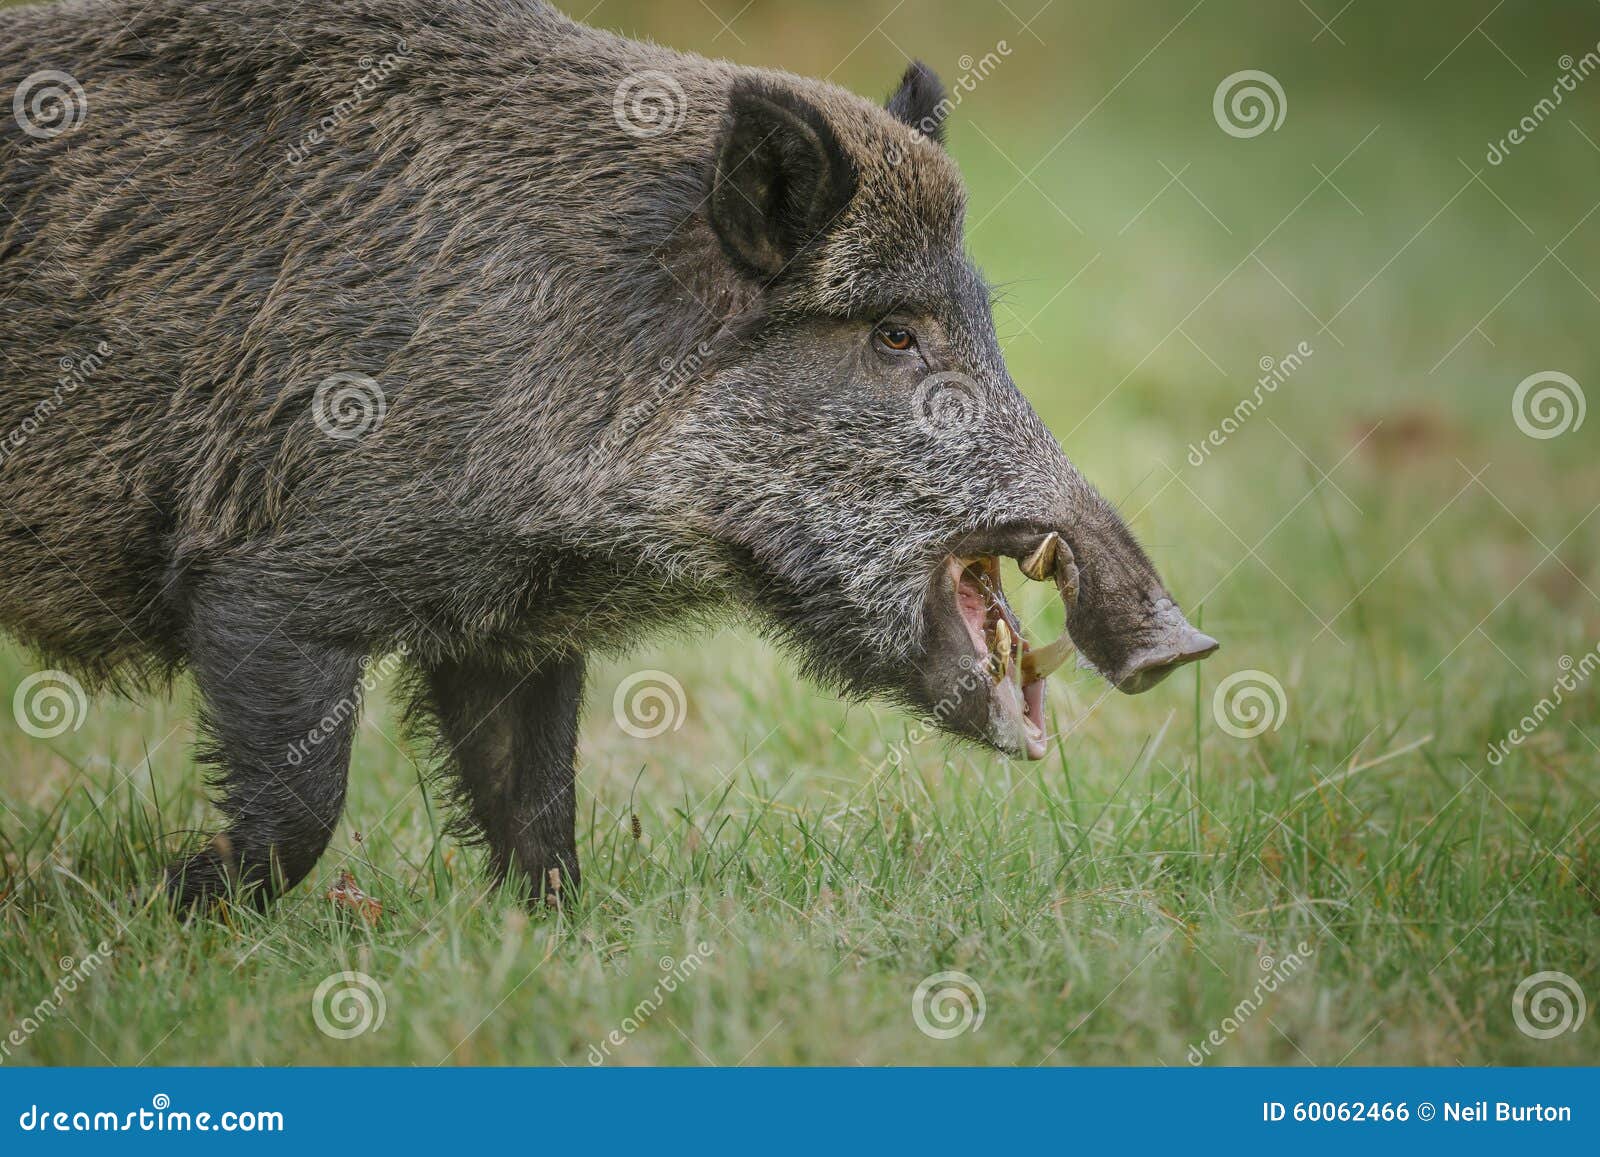 wild boar, male, foraging for apples